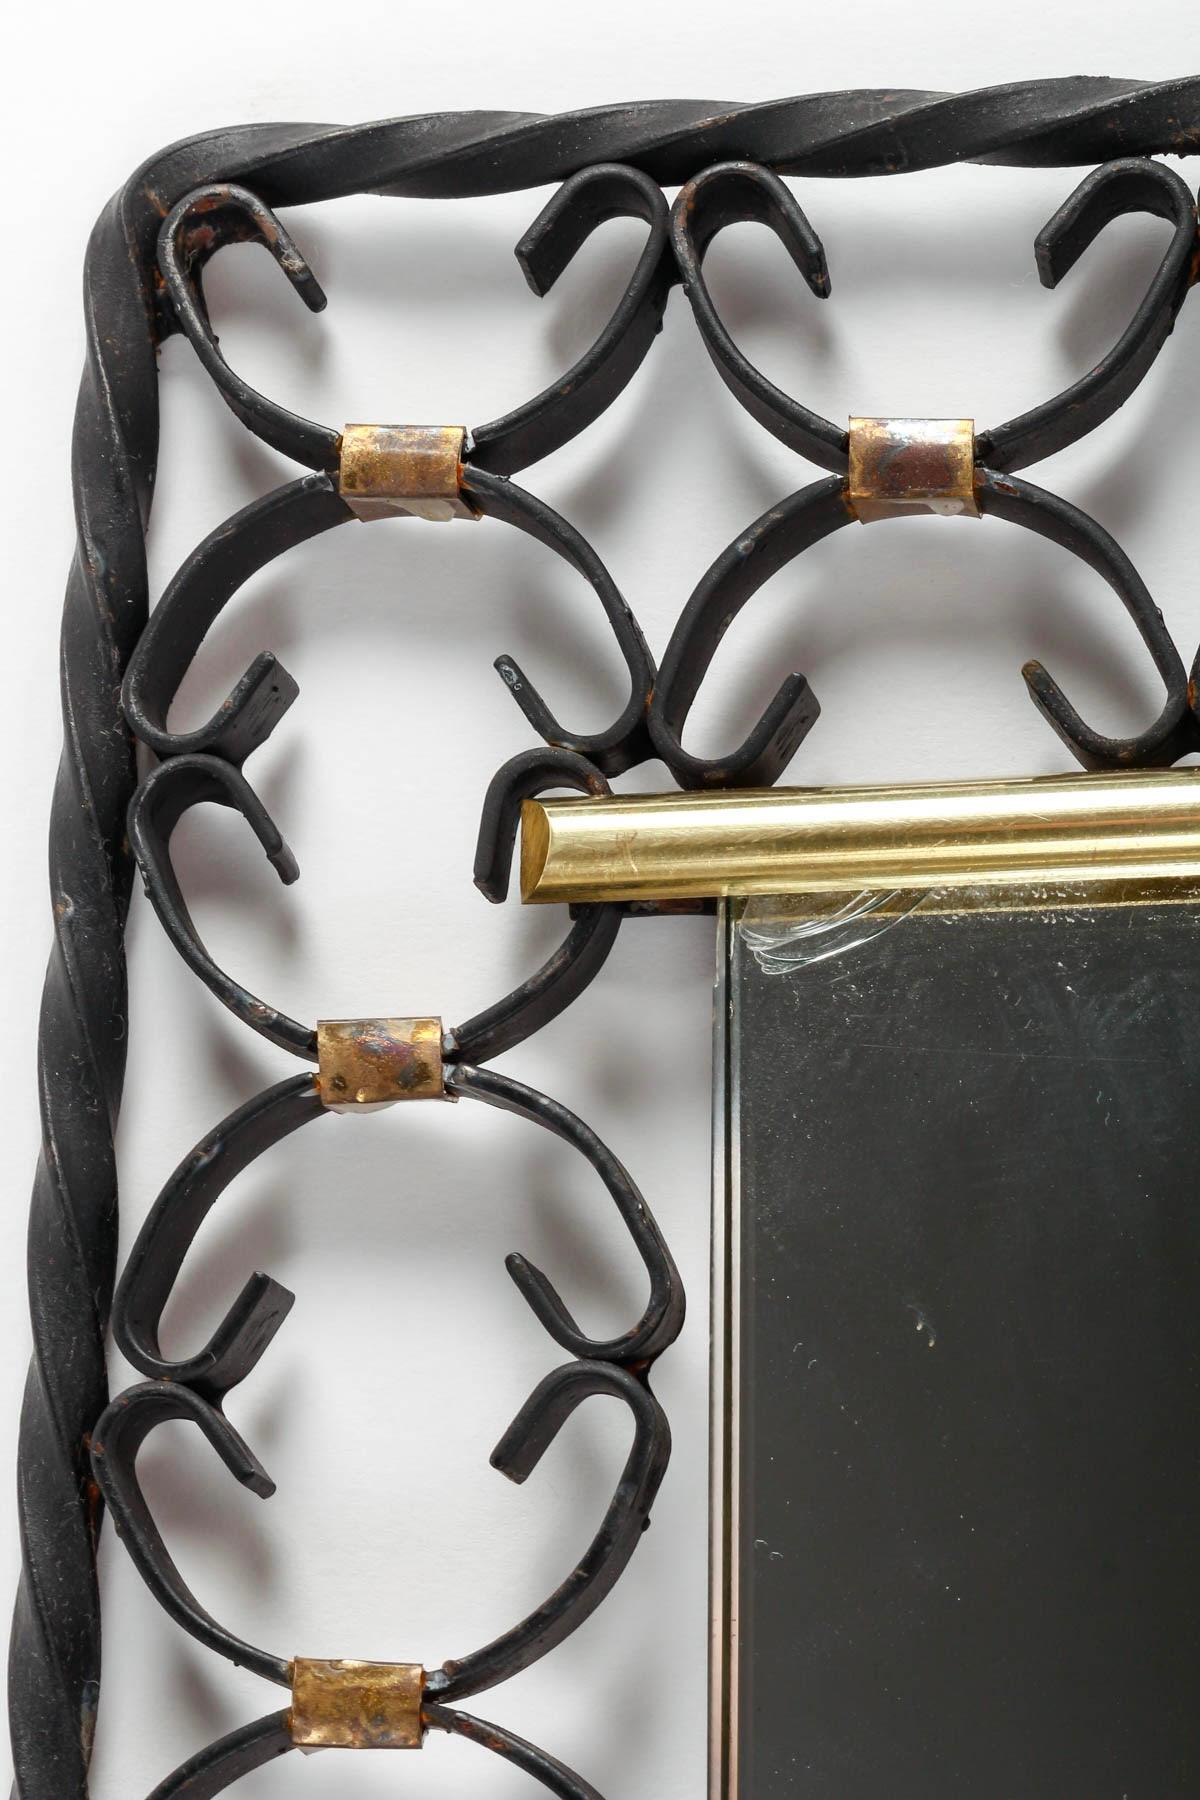 Wrought Iron and Brass Mirror, 1950s-1960s Design. For Sale 1